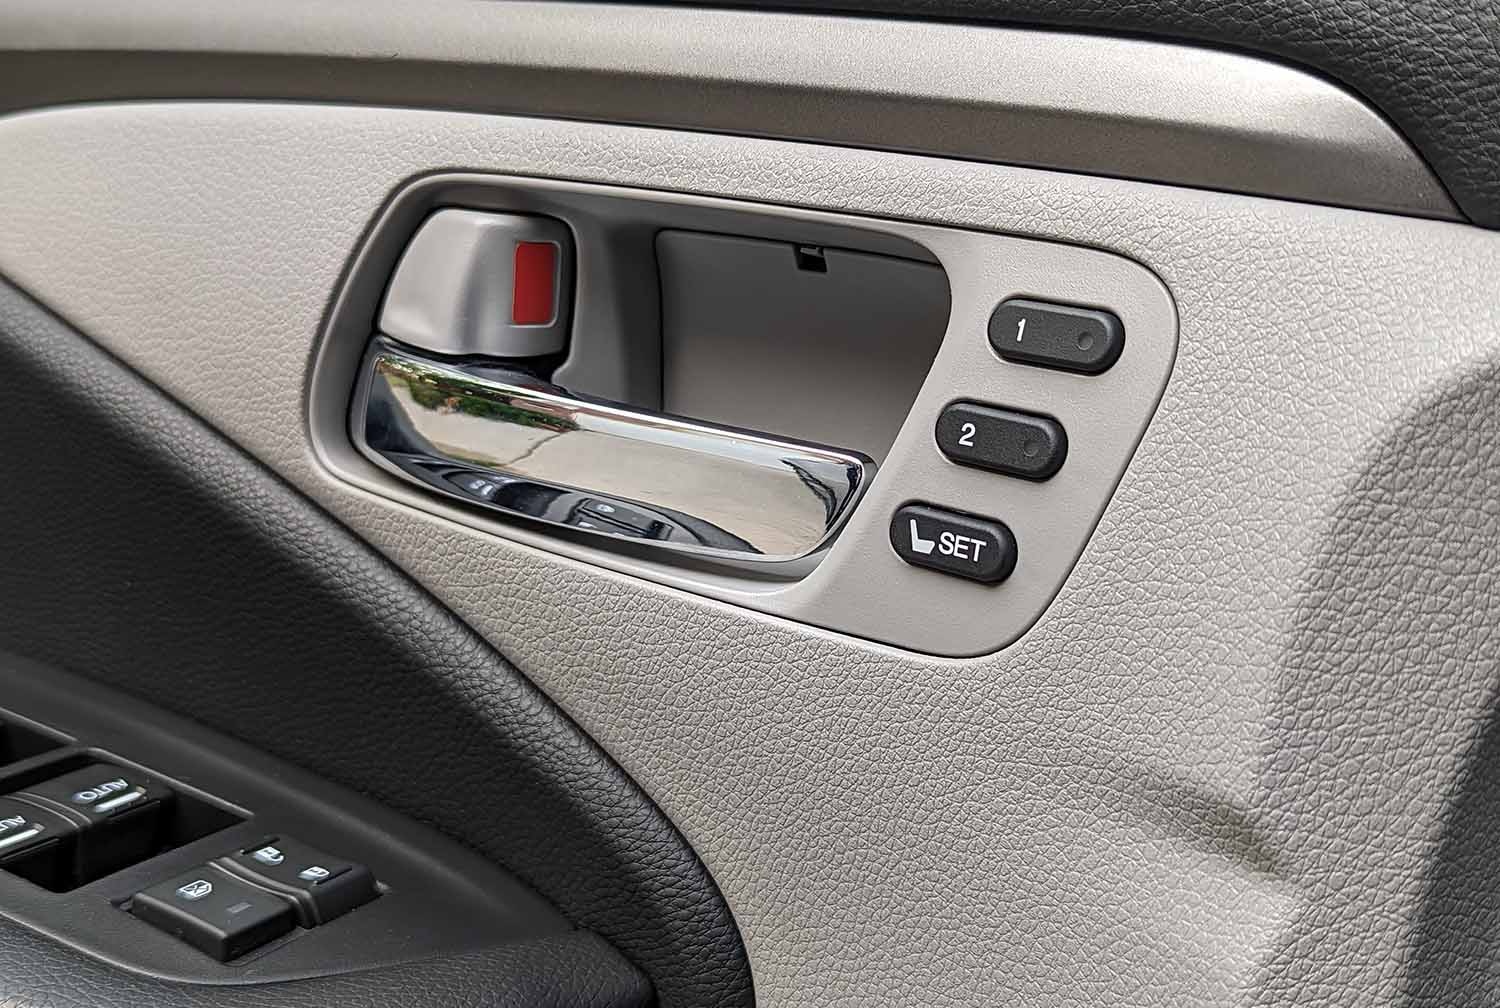  View of memory seat buttons on vehicle interior door.